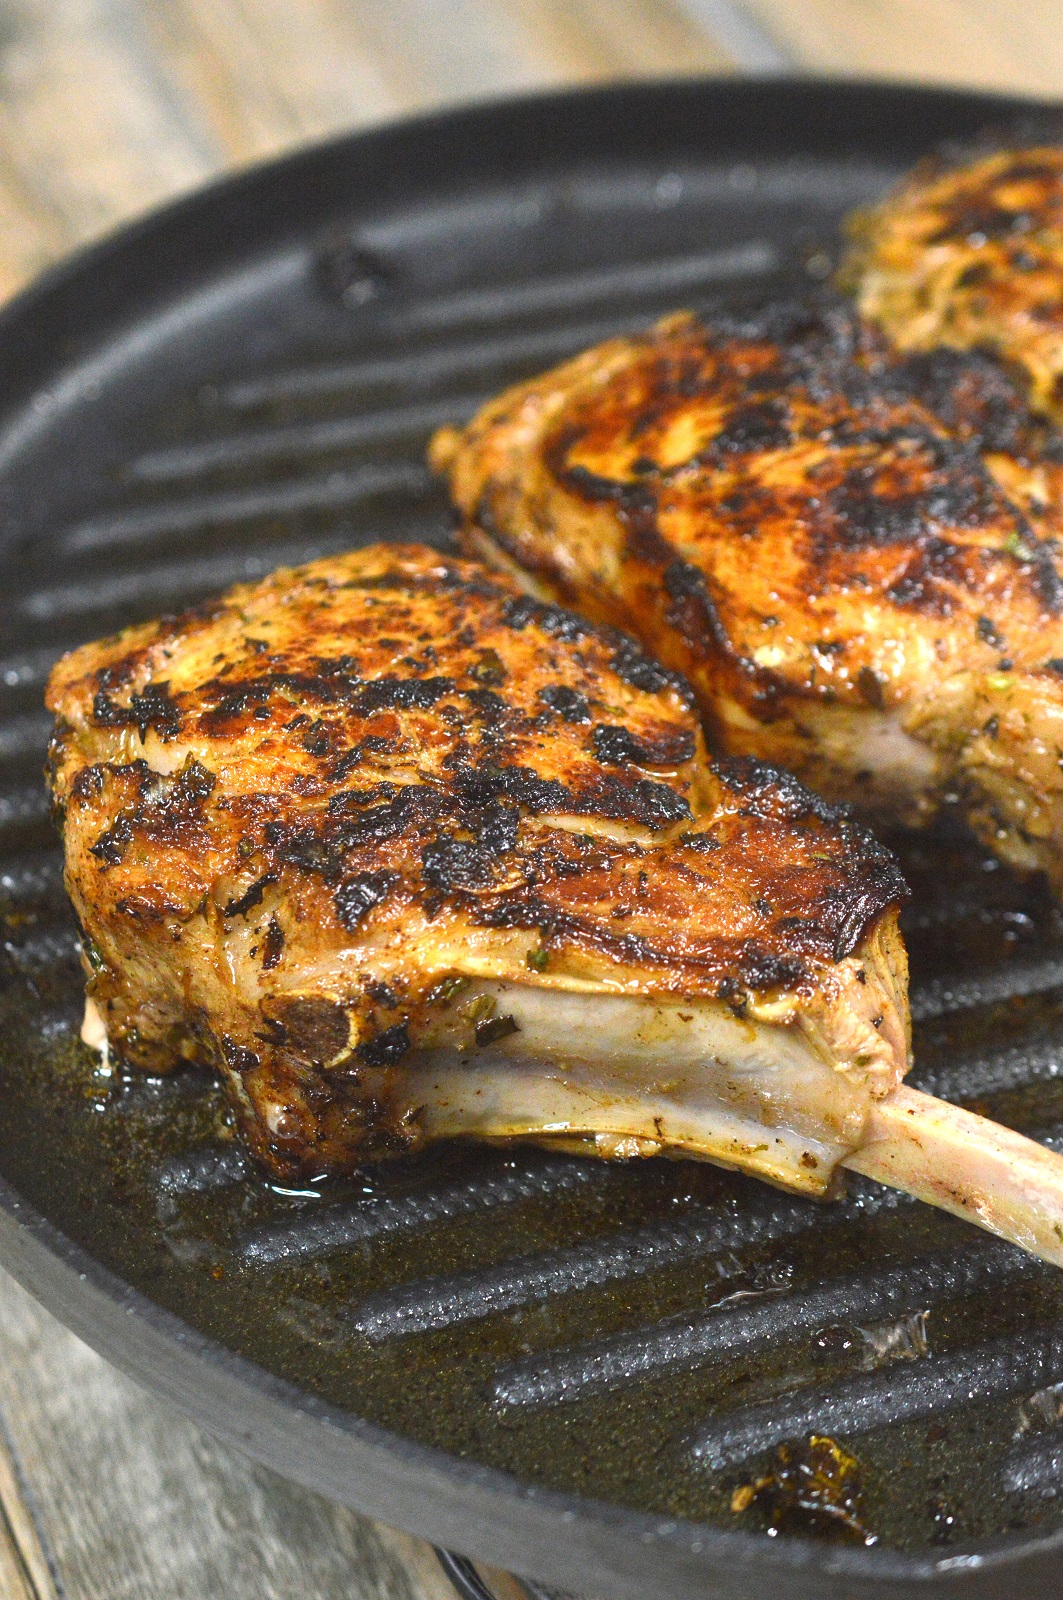 Grilled Veal Chops recipe